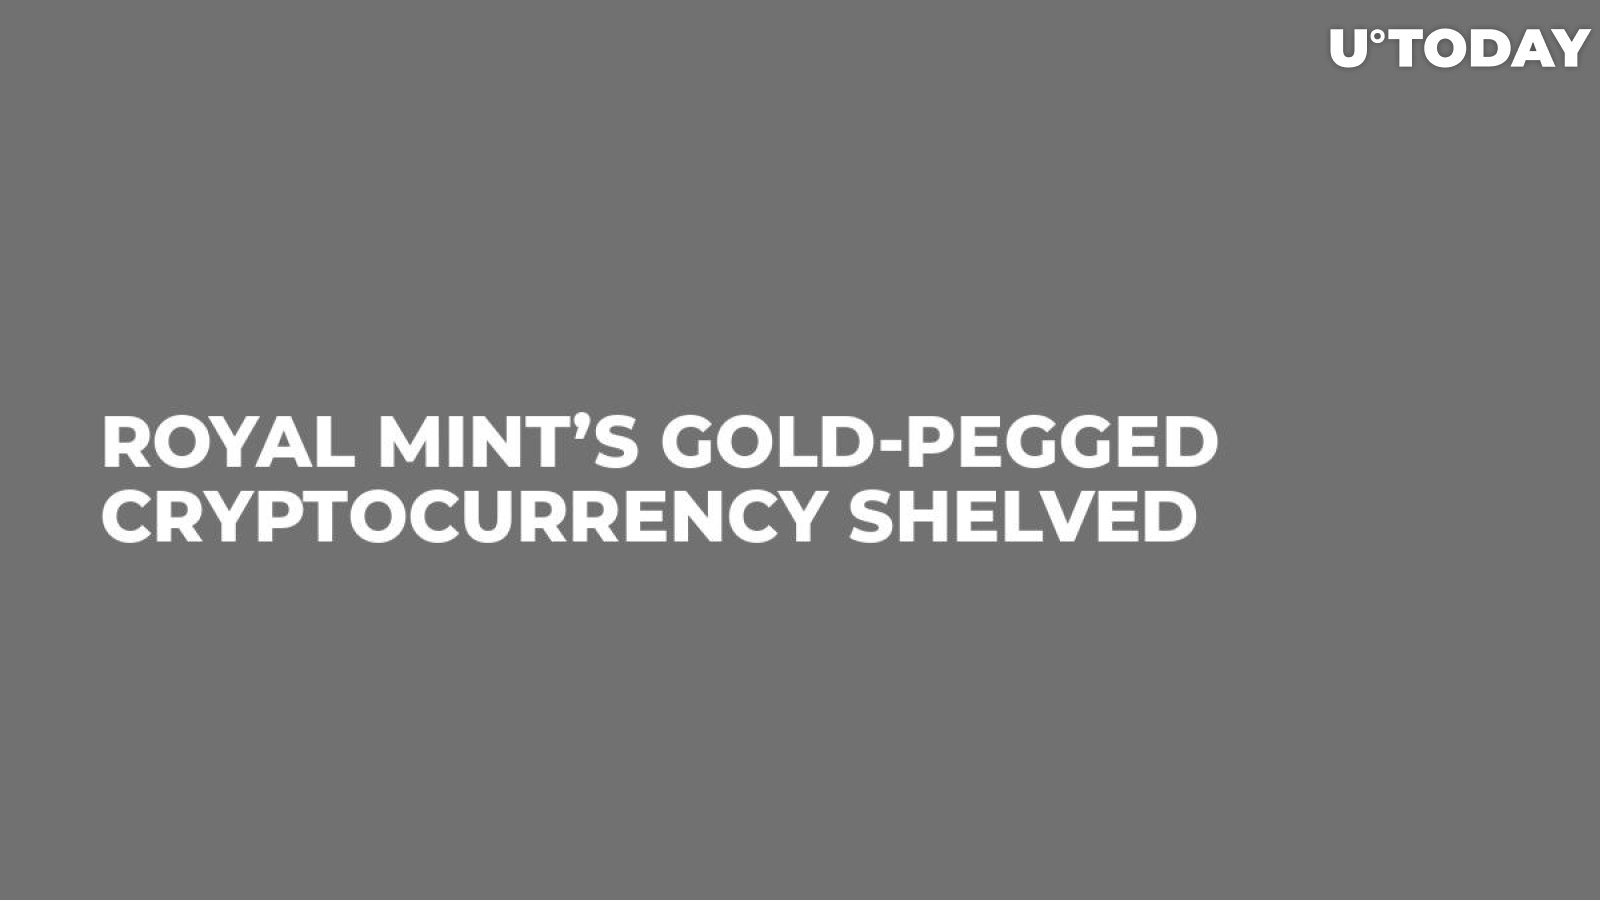 Royal Mint’s Gold-Pegged Cryptocurrency Shelved